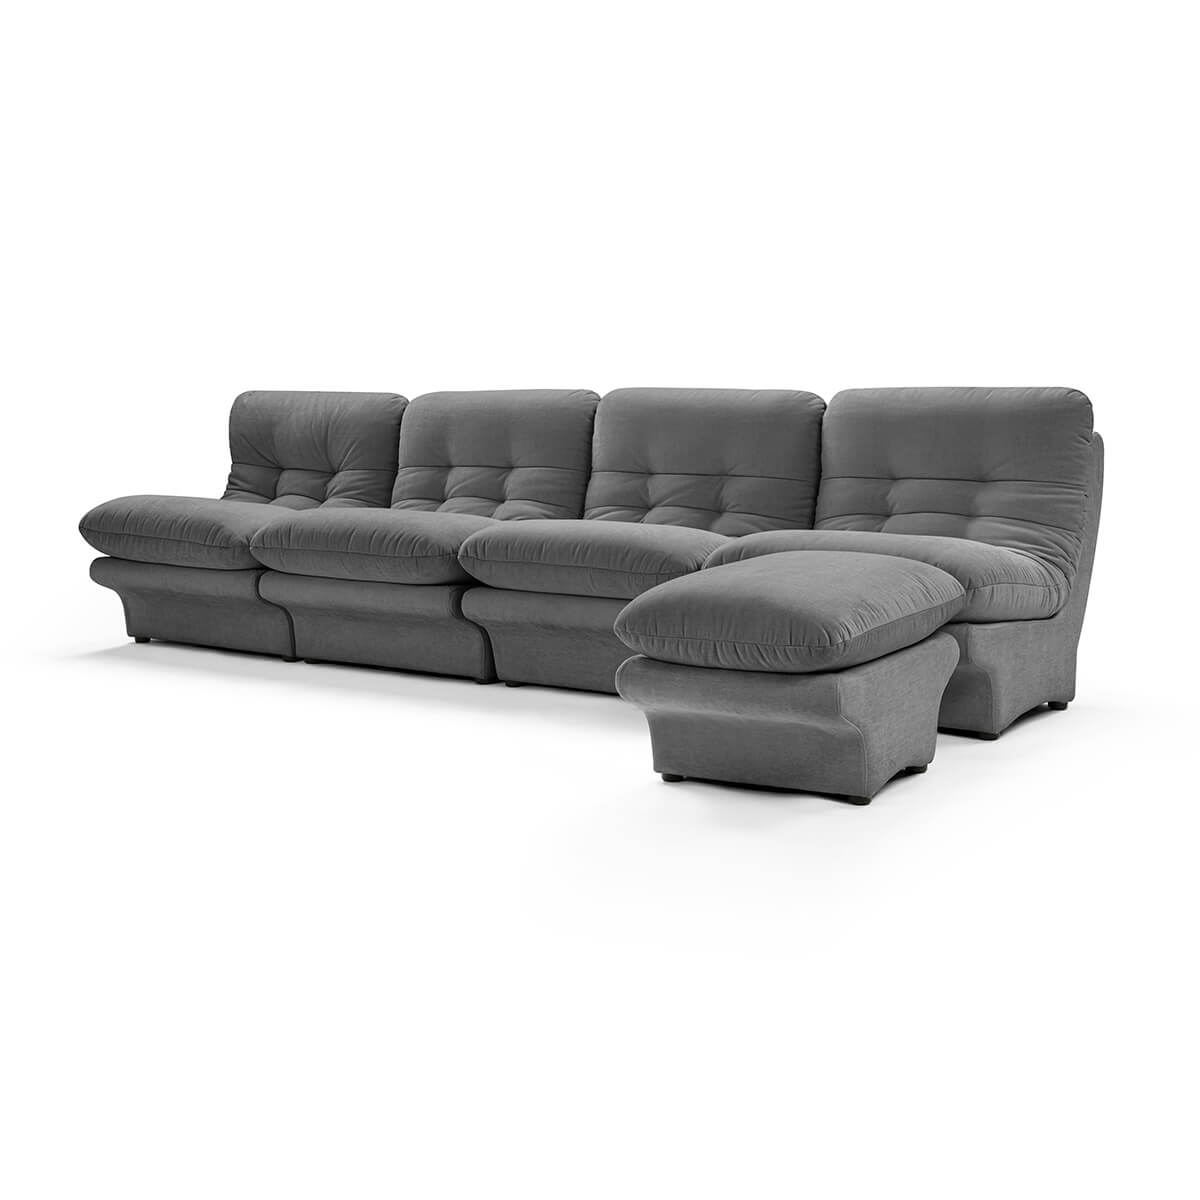 Carsons Mid Century Curved Modular Sectional Sofa / Combination 002 Chenille Helios-Pewter Grey